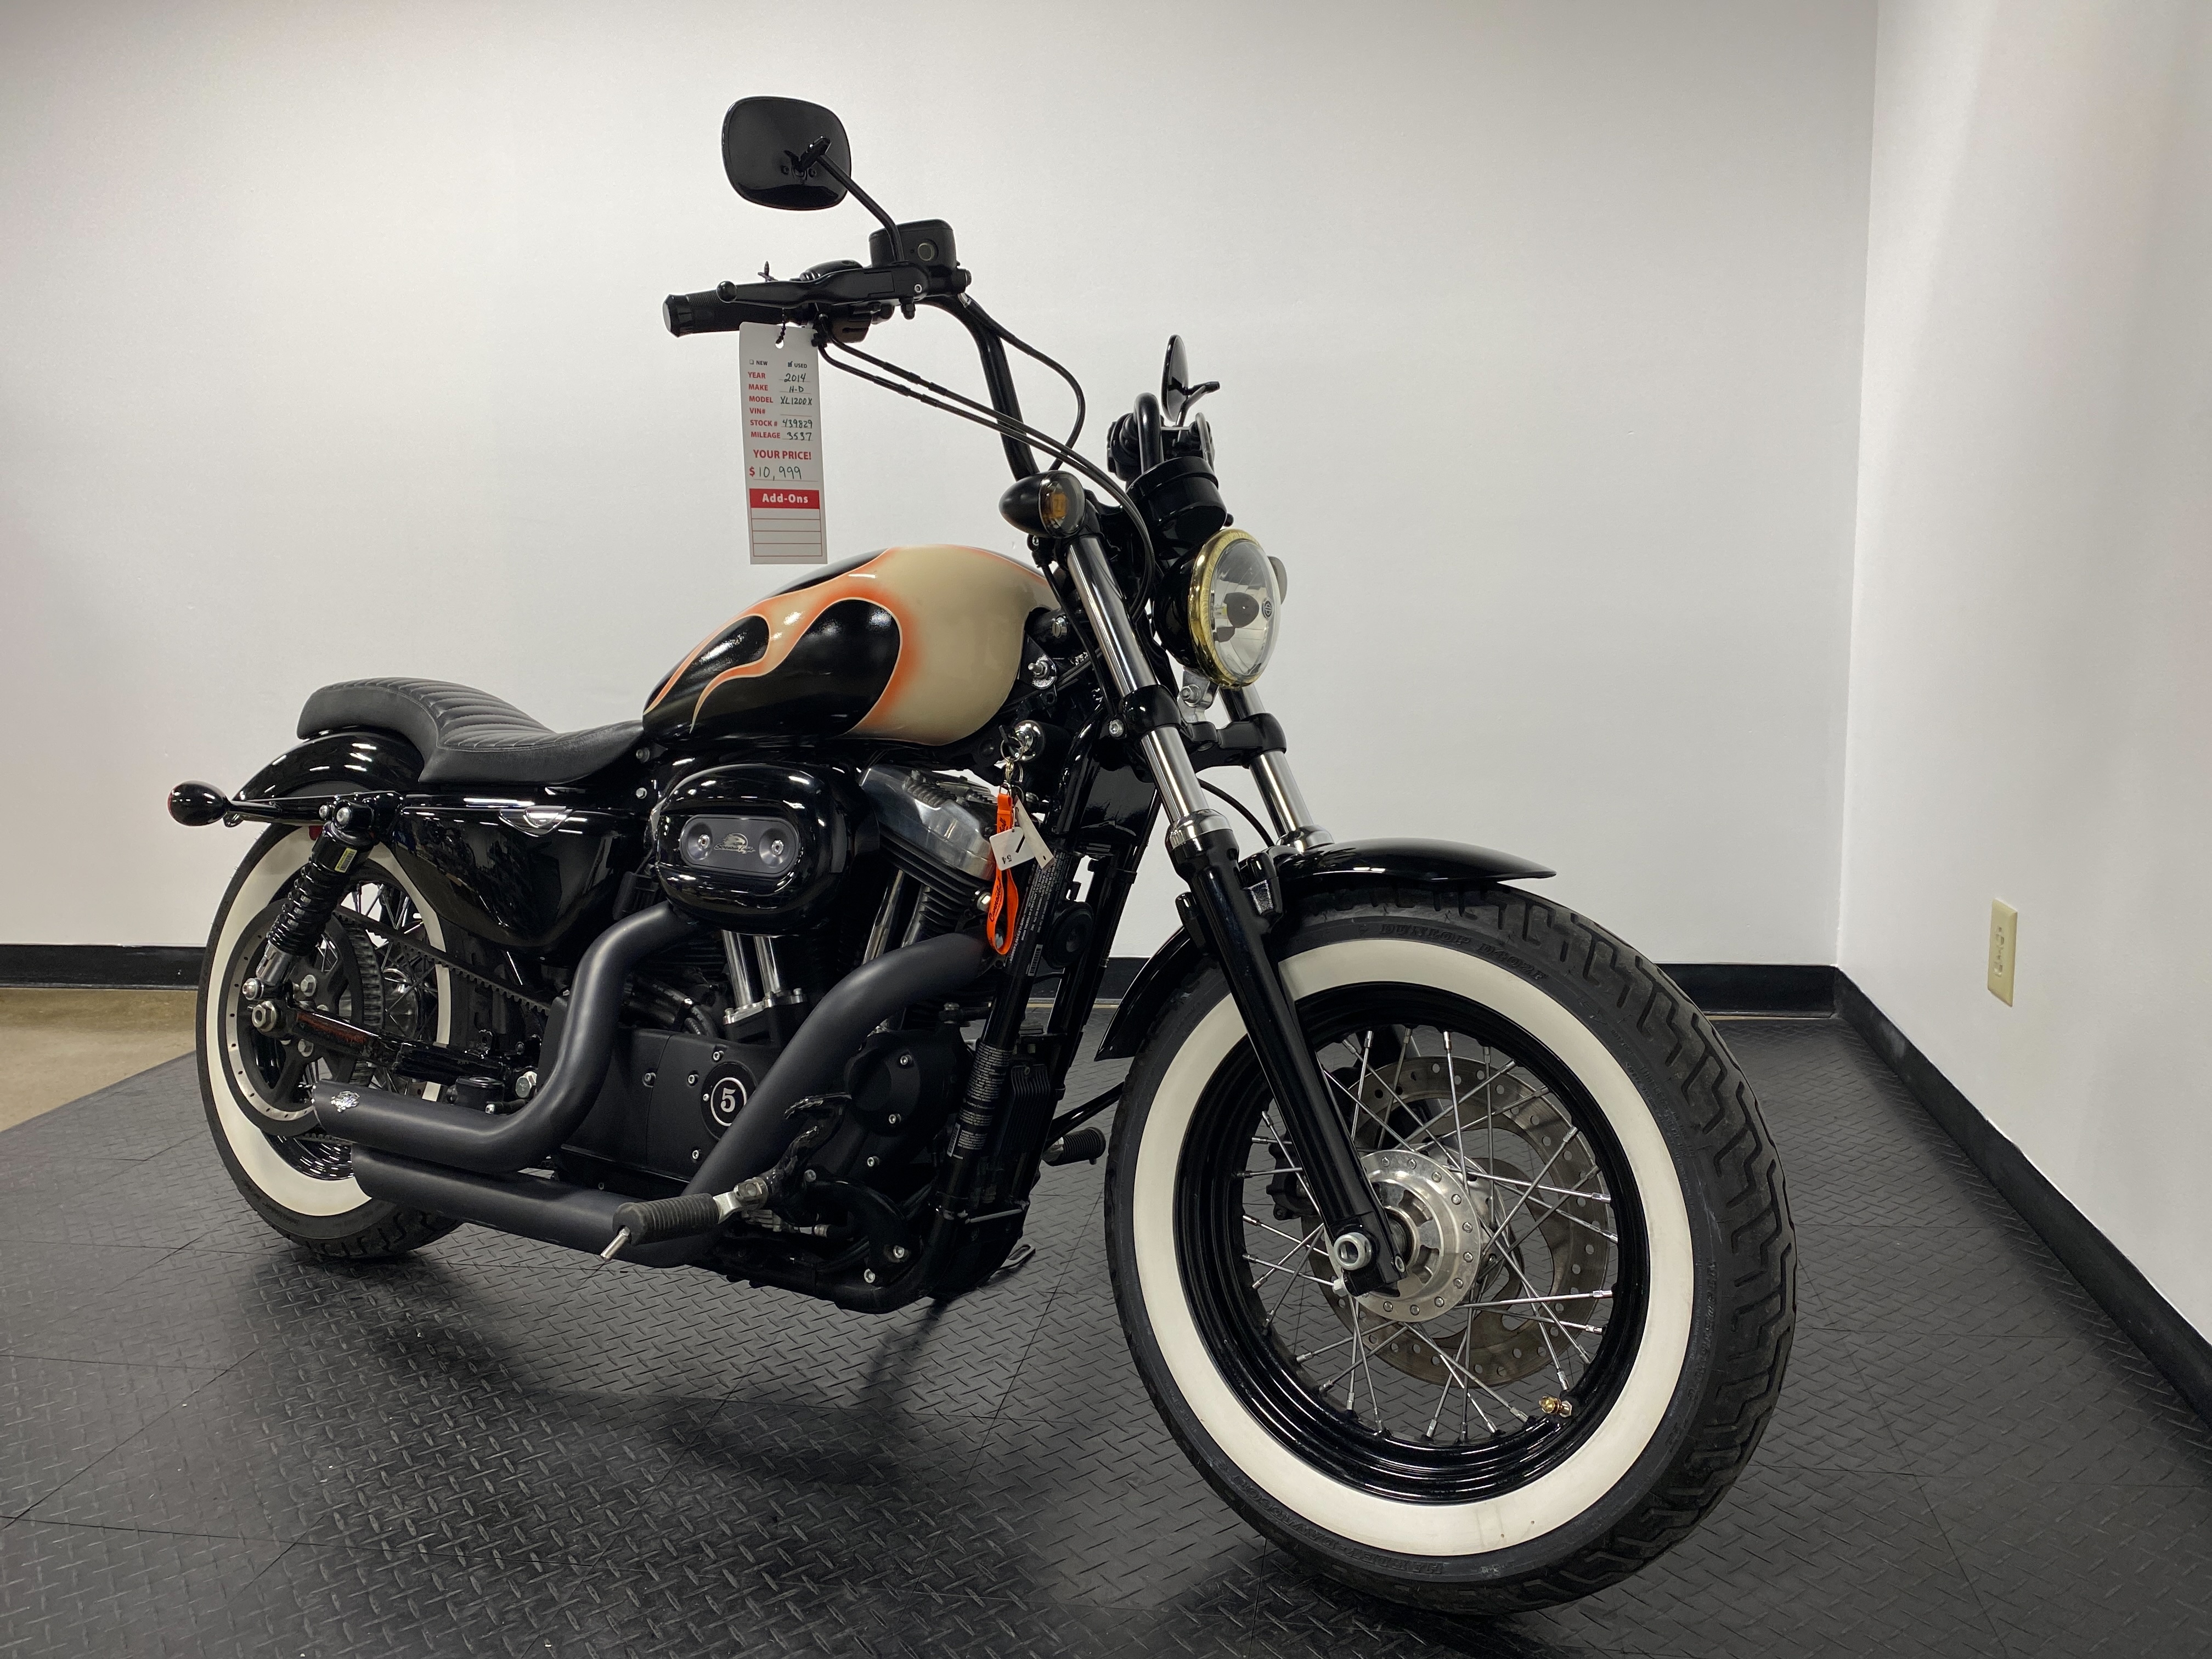 2014 Harley-Davidson Sportster Forty-Eight at Cannonball Harley-Davidson